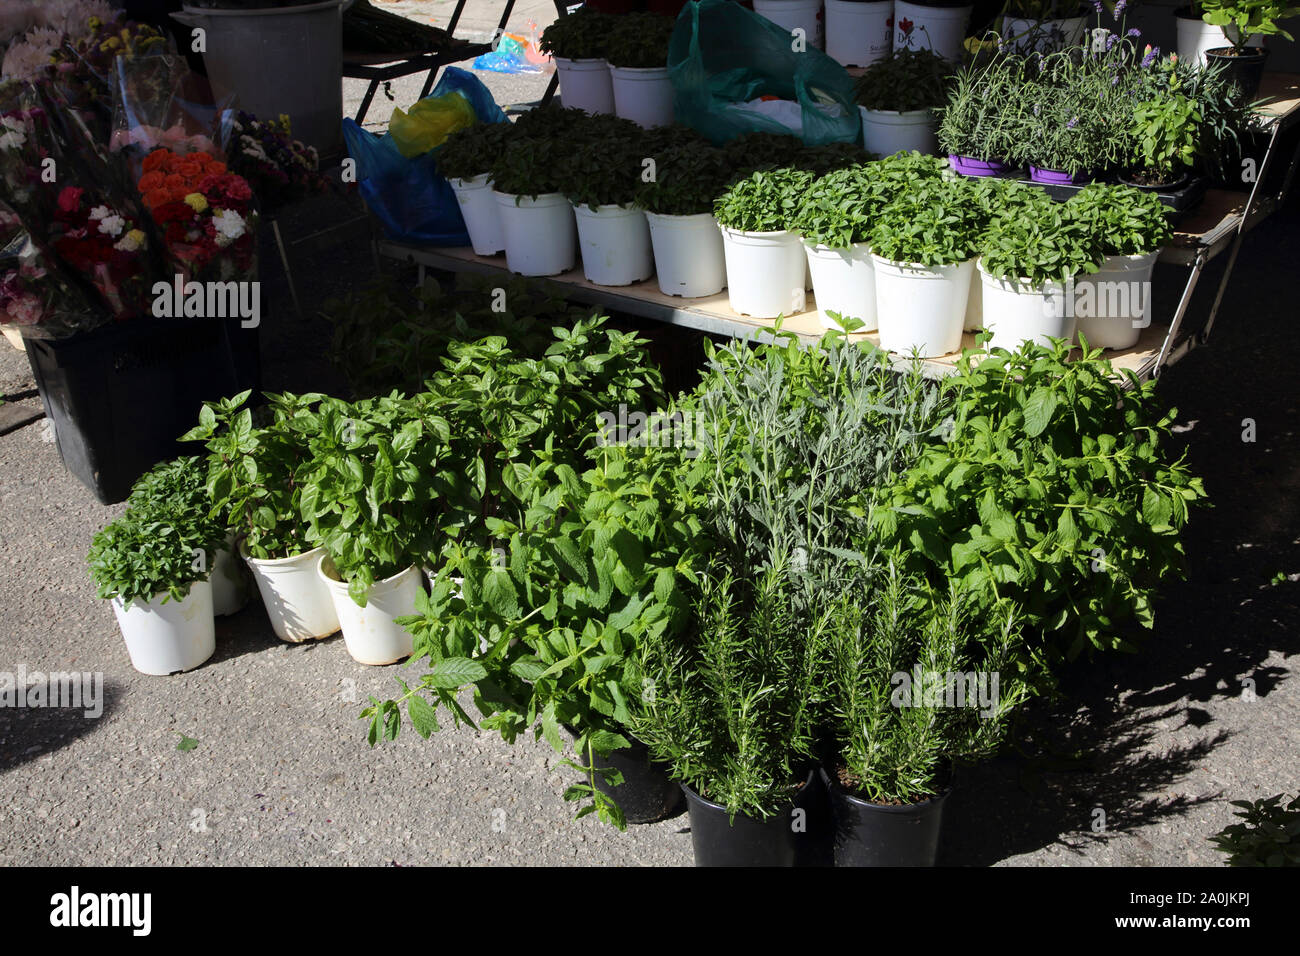 Vouliagmeni Athens Attica Greece Market pots of herbs on sale mint,basil and rosemary Stock Photo